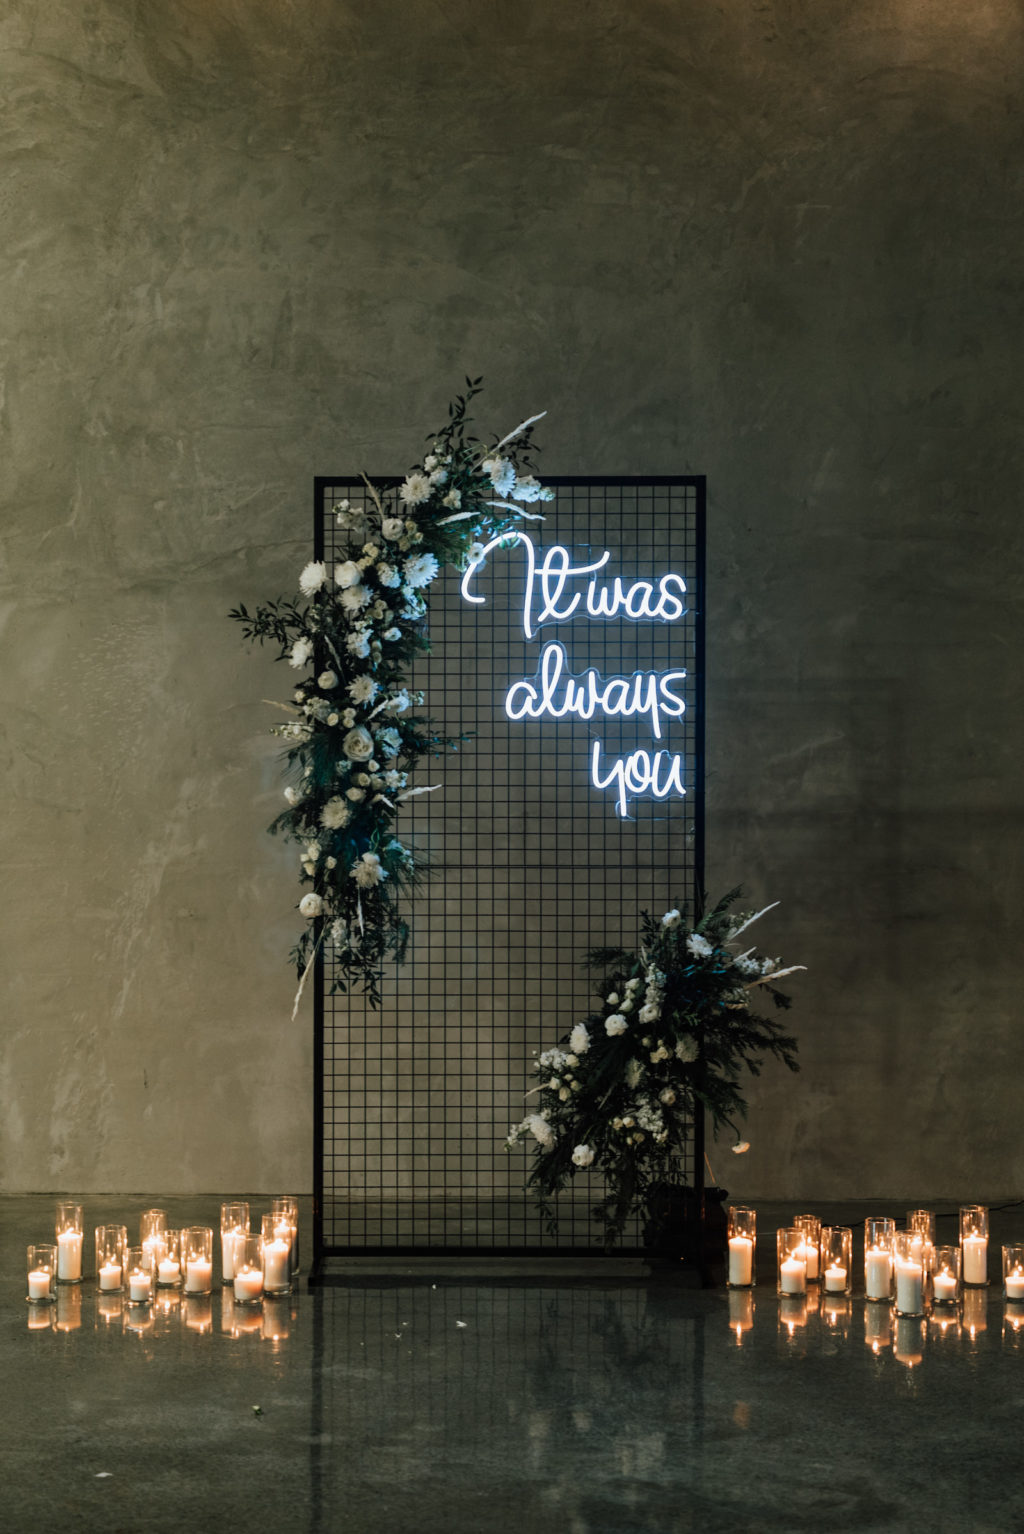 Black Modern Industrial Metal Screen Wedding Ceremony Backdrop Panel with Neon Sign, Candles, and Asymmetrical Floral Arrangements of White Roses and Winter Pine Greenery